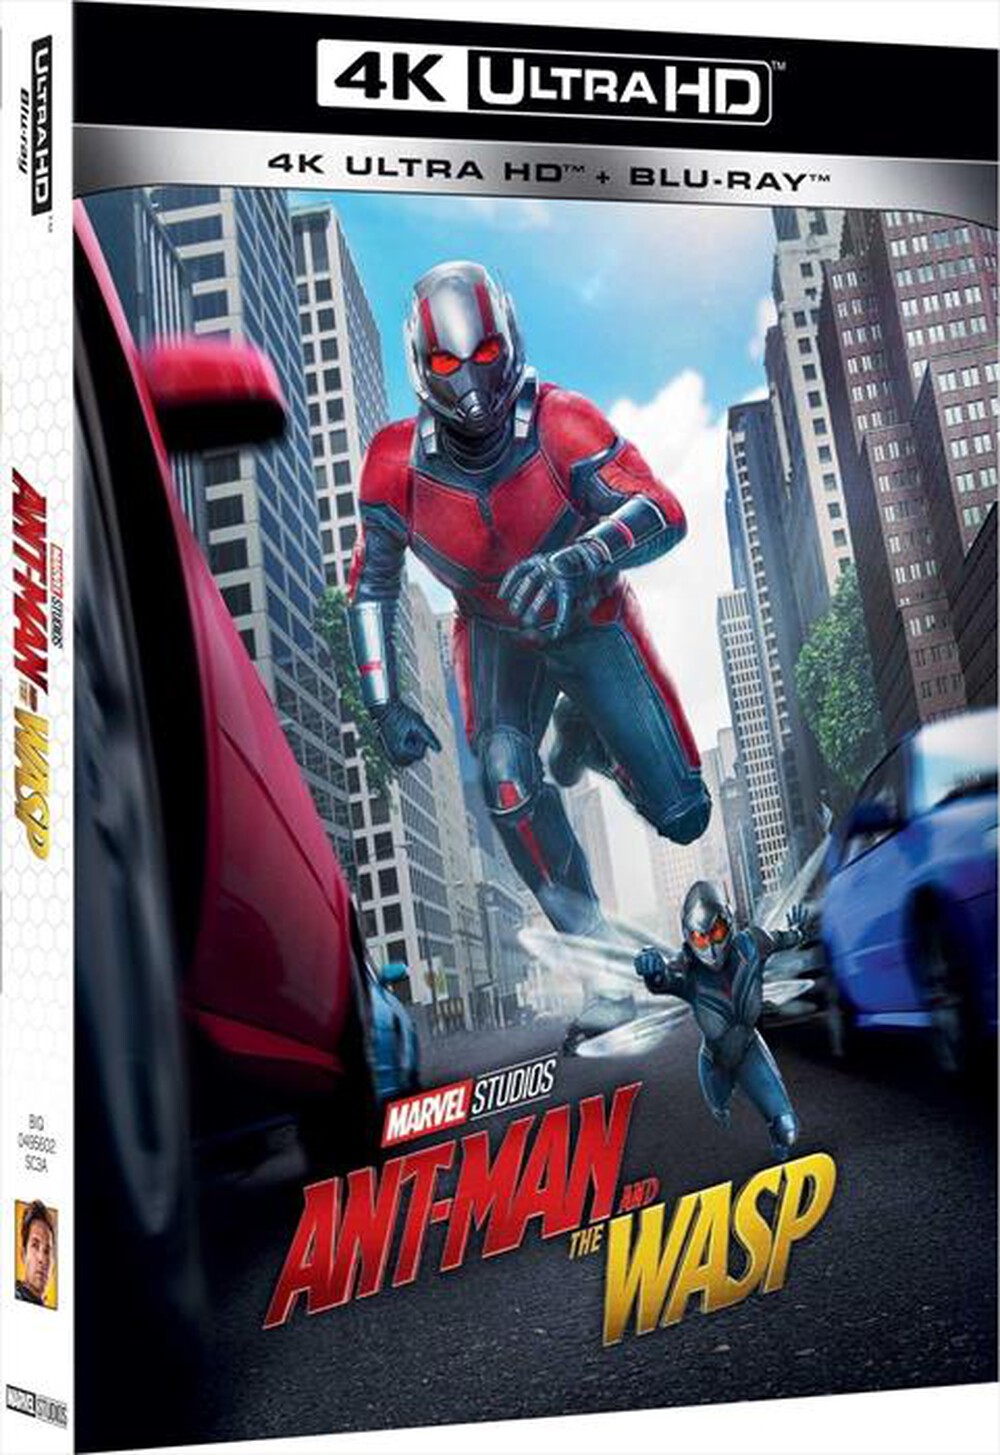 "EAGLE PICTURES - Ant-Man And The Wasp (4K Ultra Hd+Blu-Ray)"